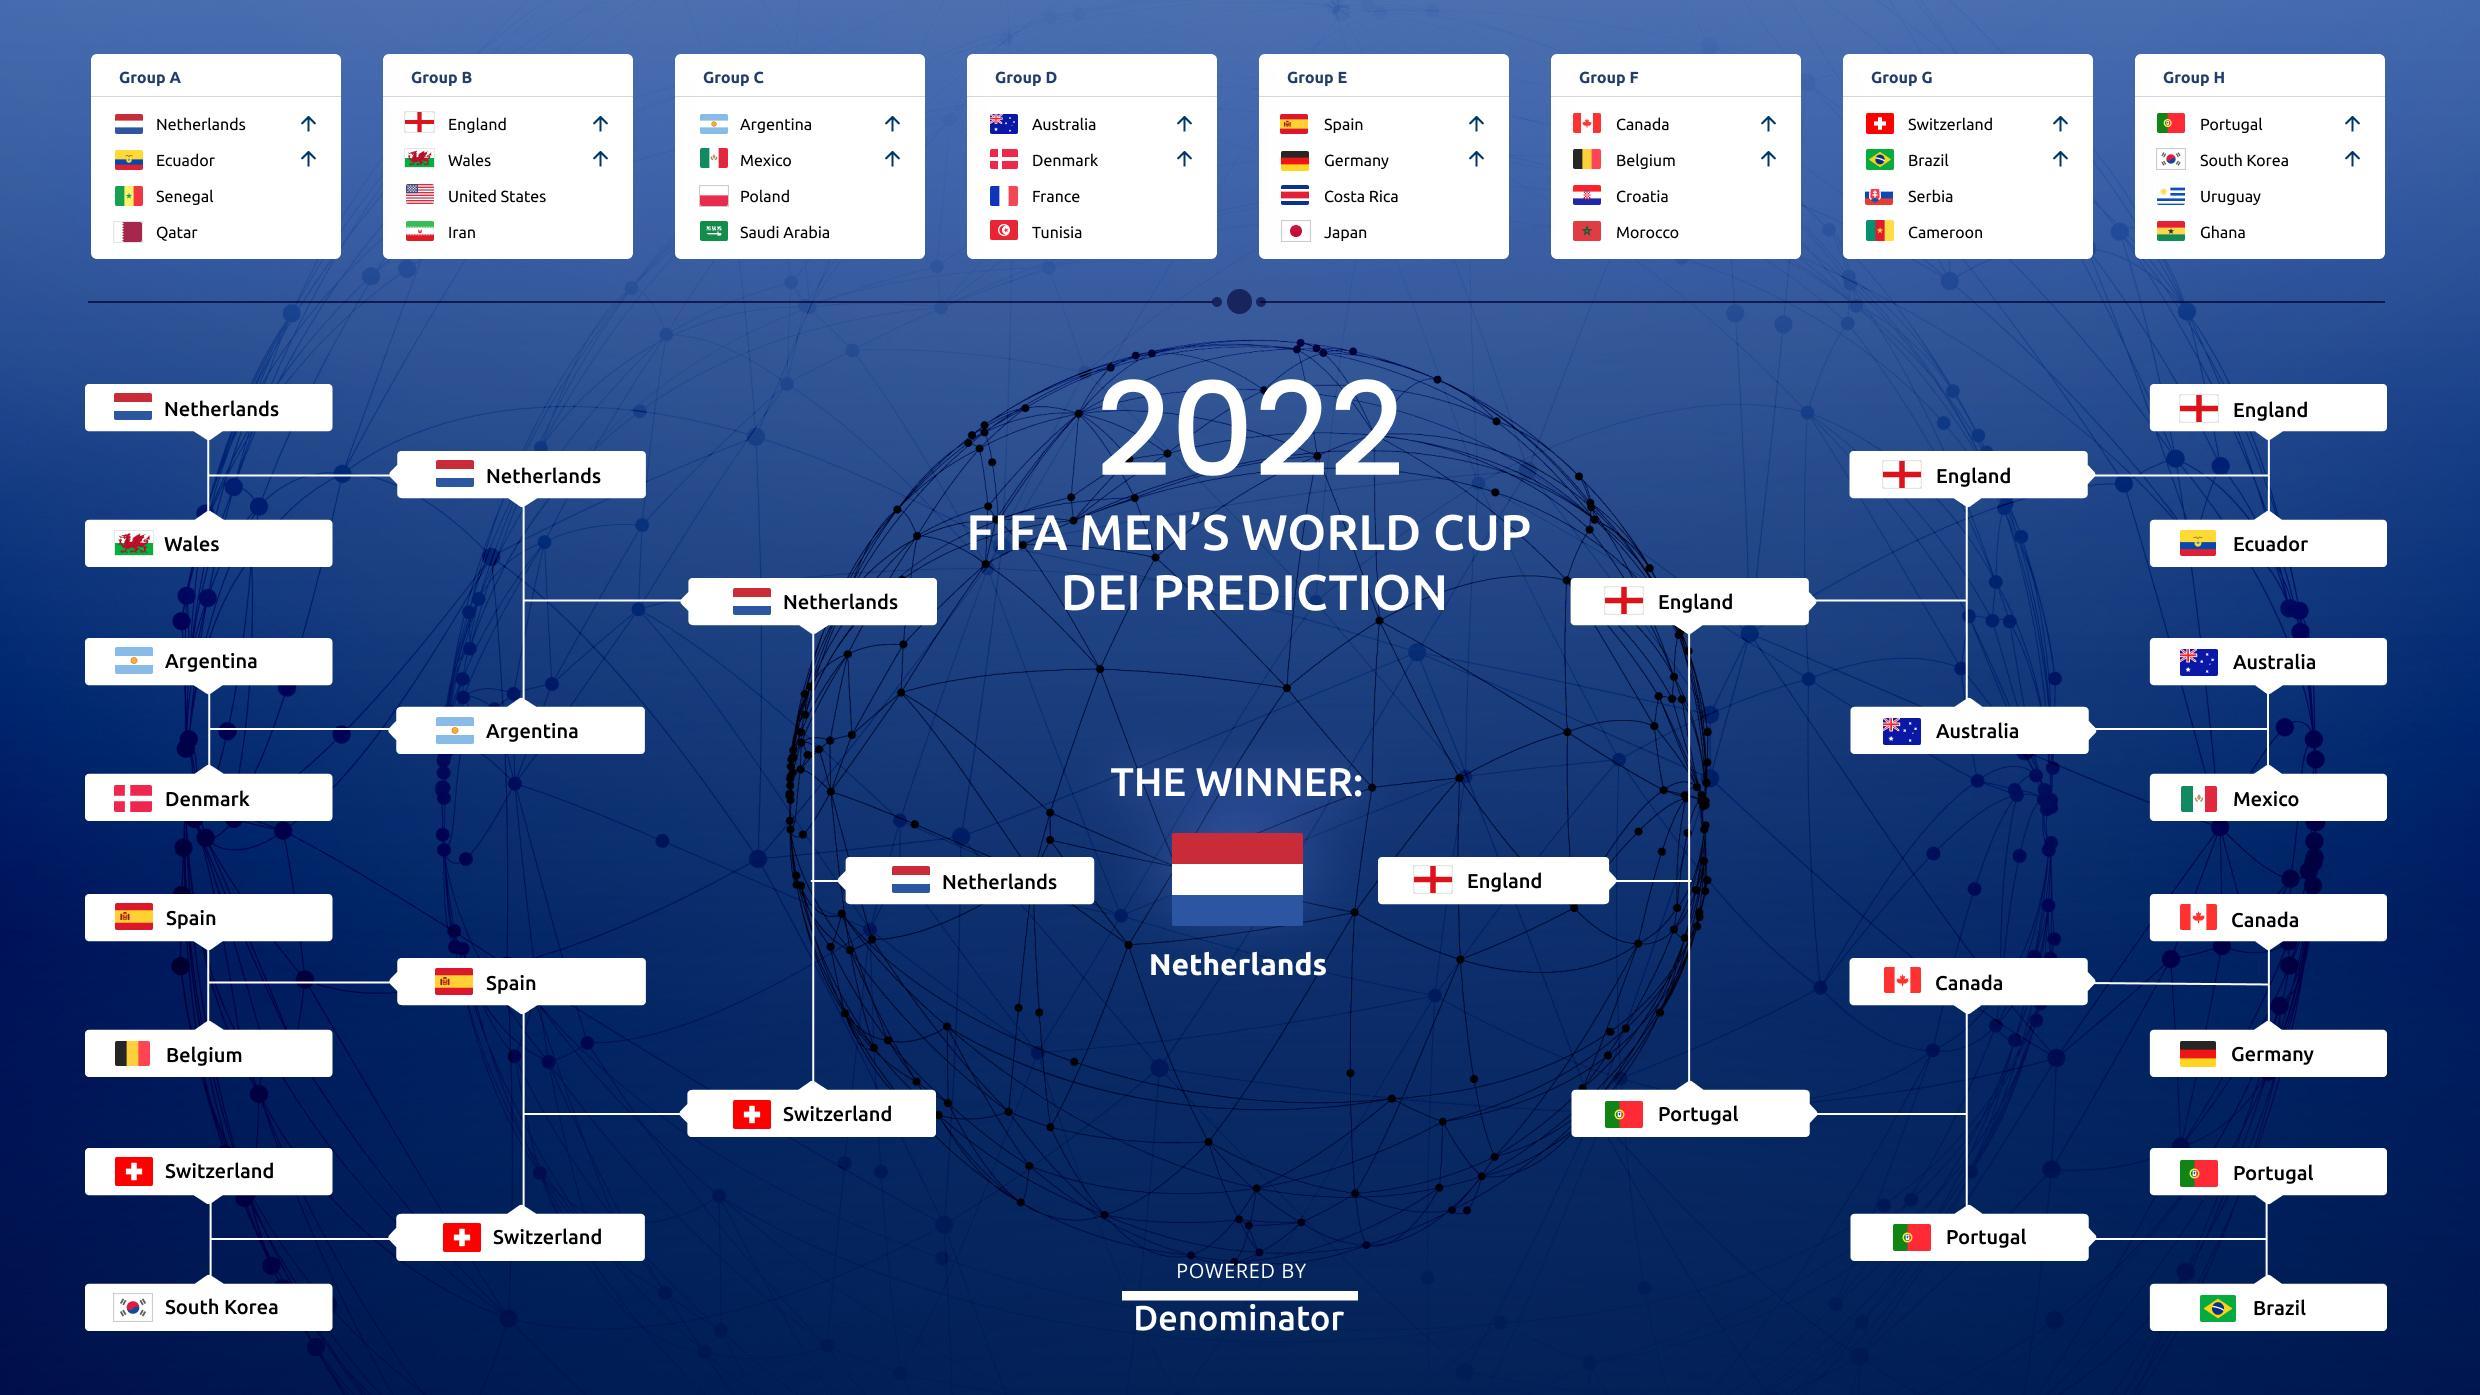 Can Diversity, Equity, & Inclusion predict the outcome of the Men’s World Cup 2022?